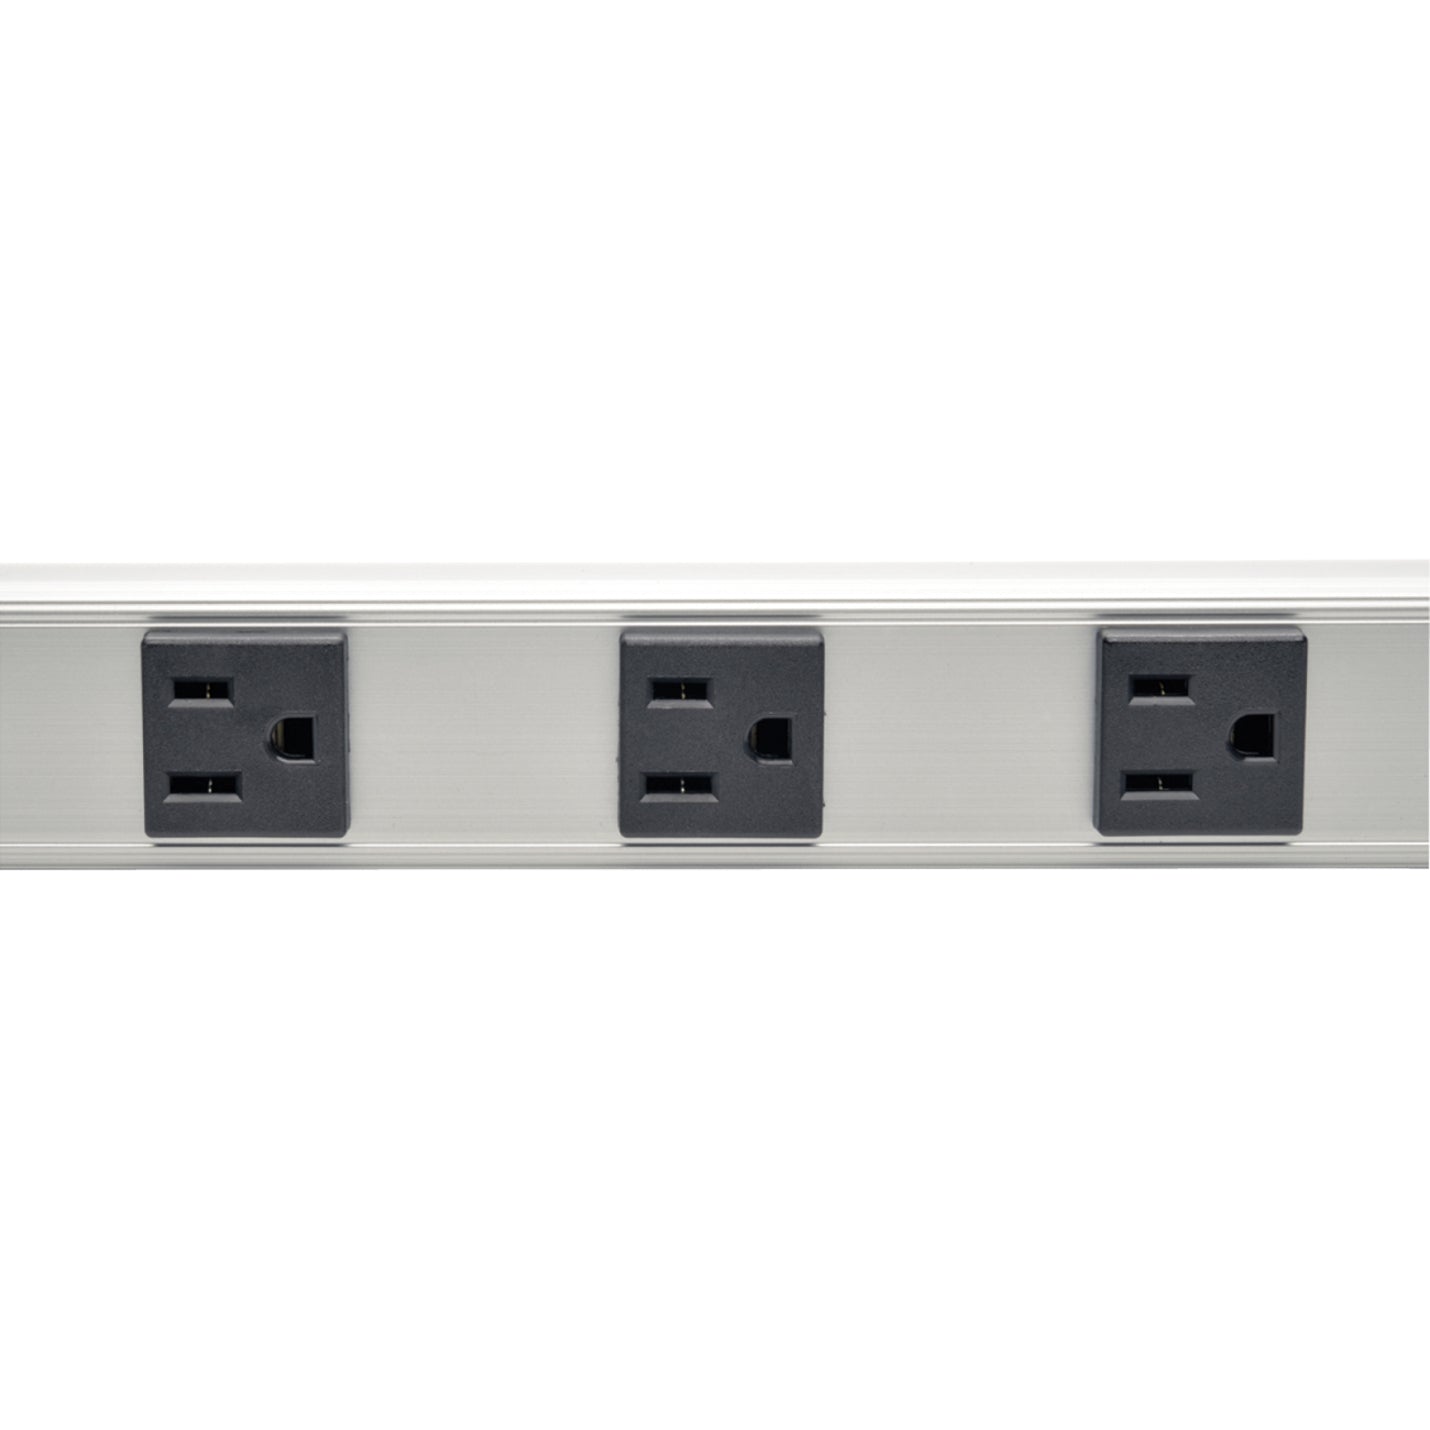 Tripp Lite PS361206 12-outlet 36-in. Vertical Power Strip with 6-ft. Cord, 1800W, 120V AC, RoHS Certified